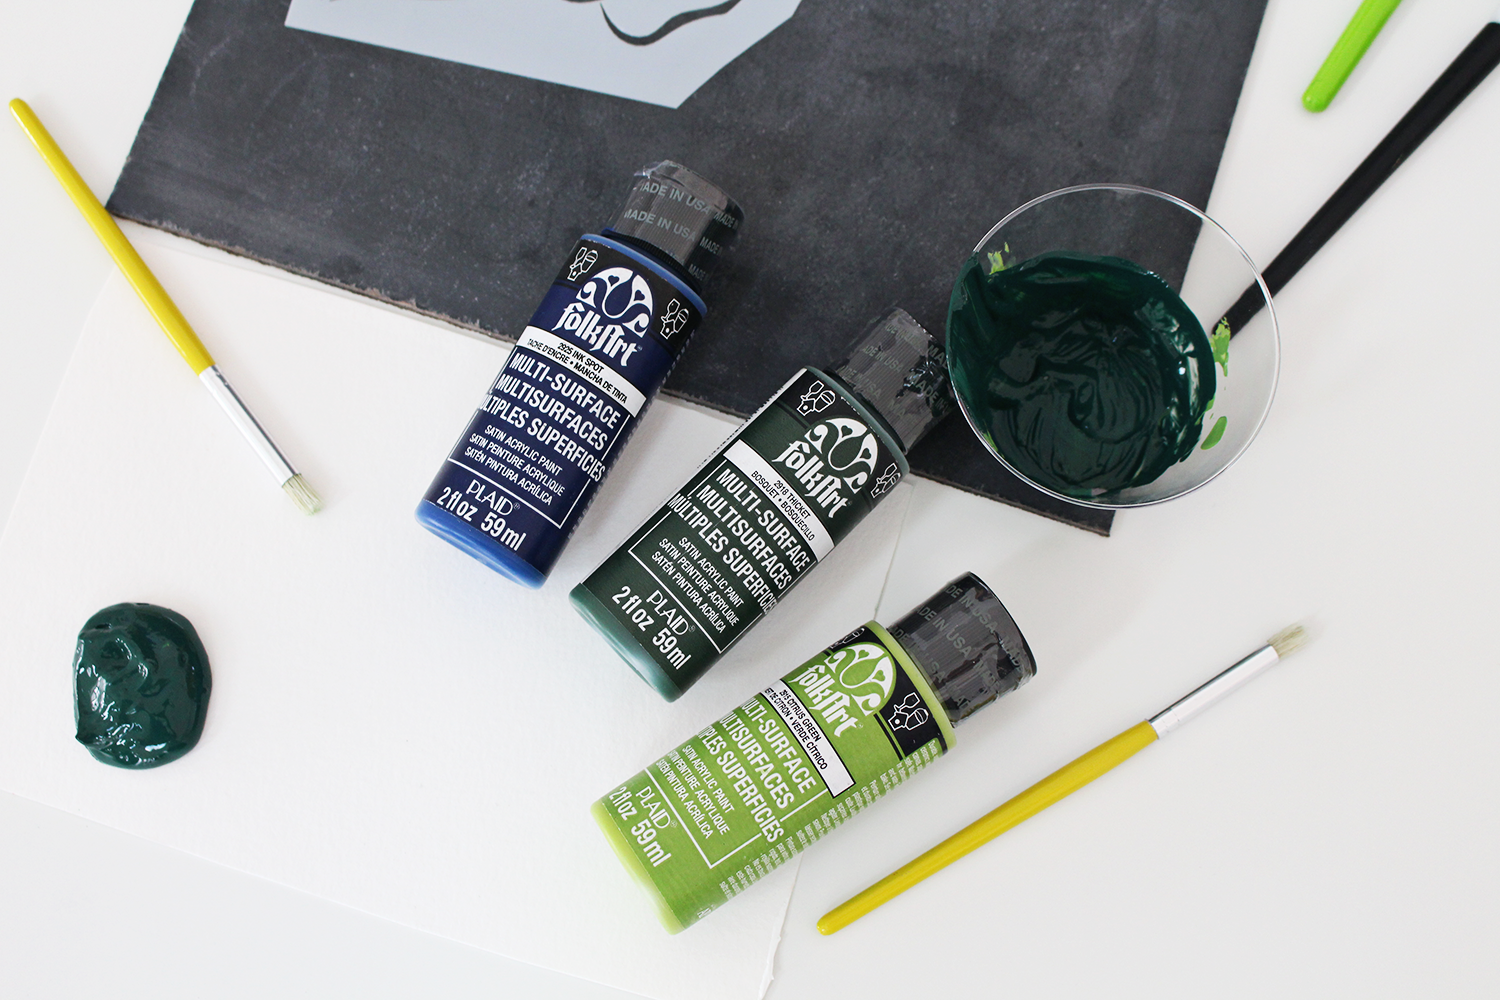 Folk Art makes the most beautiful paints for stenciling